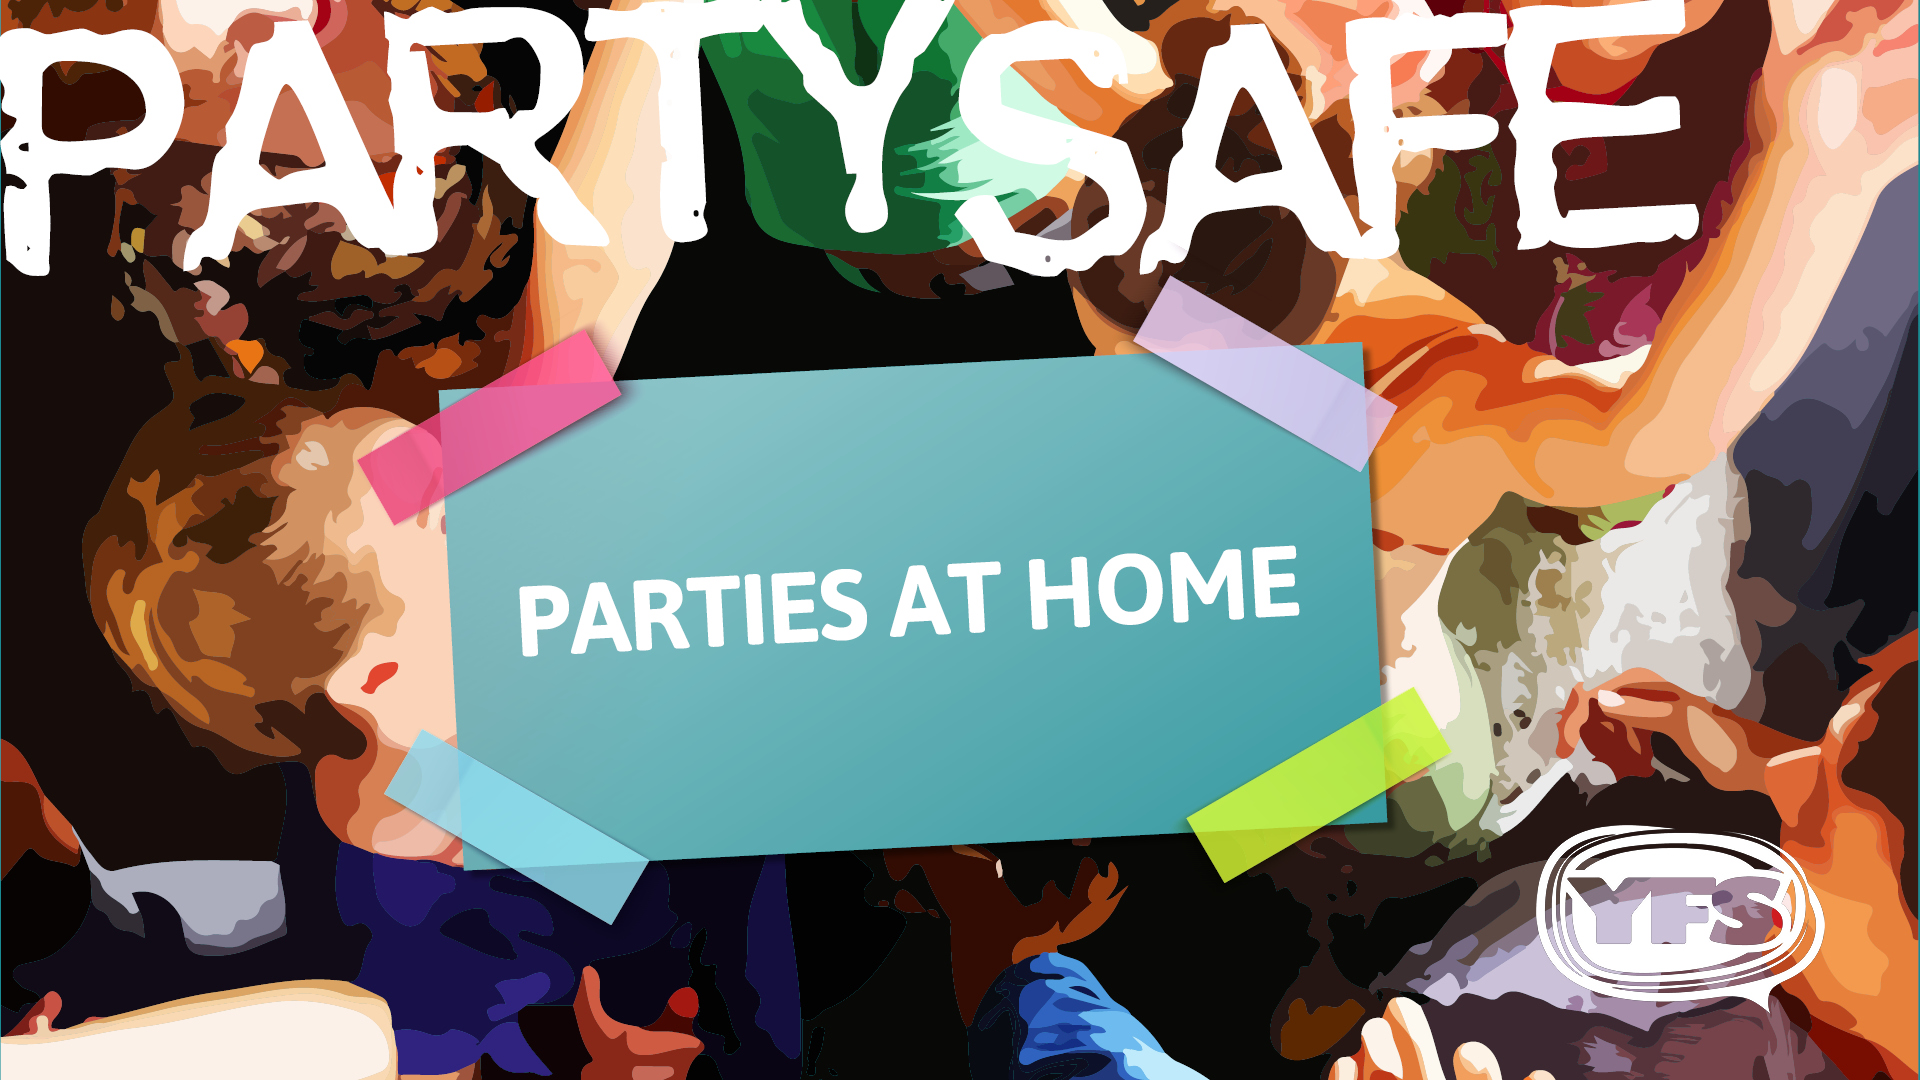 You are currently viewing Party safely: Parties at home